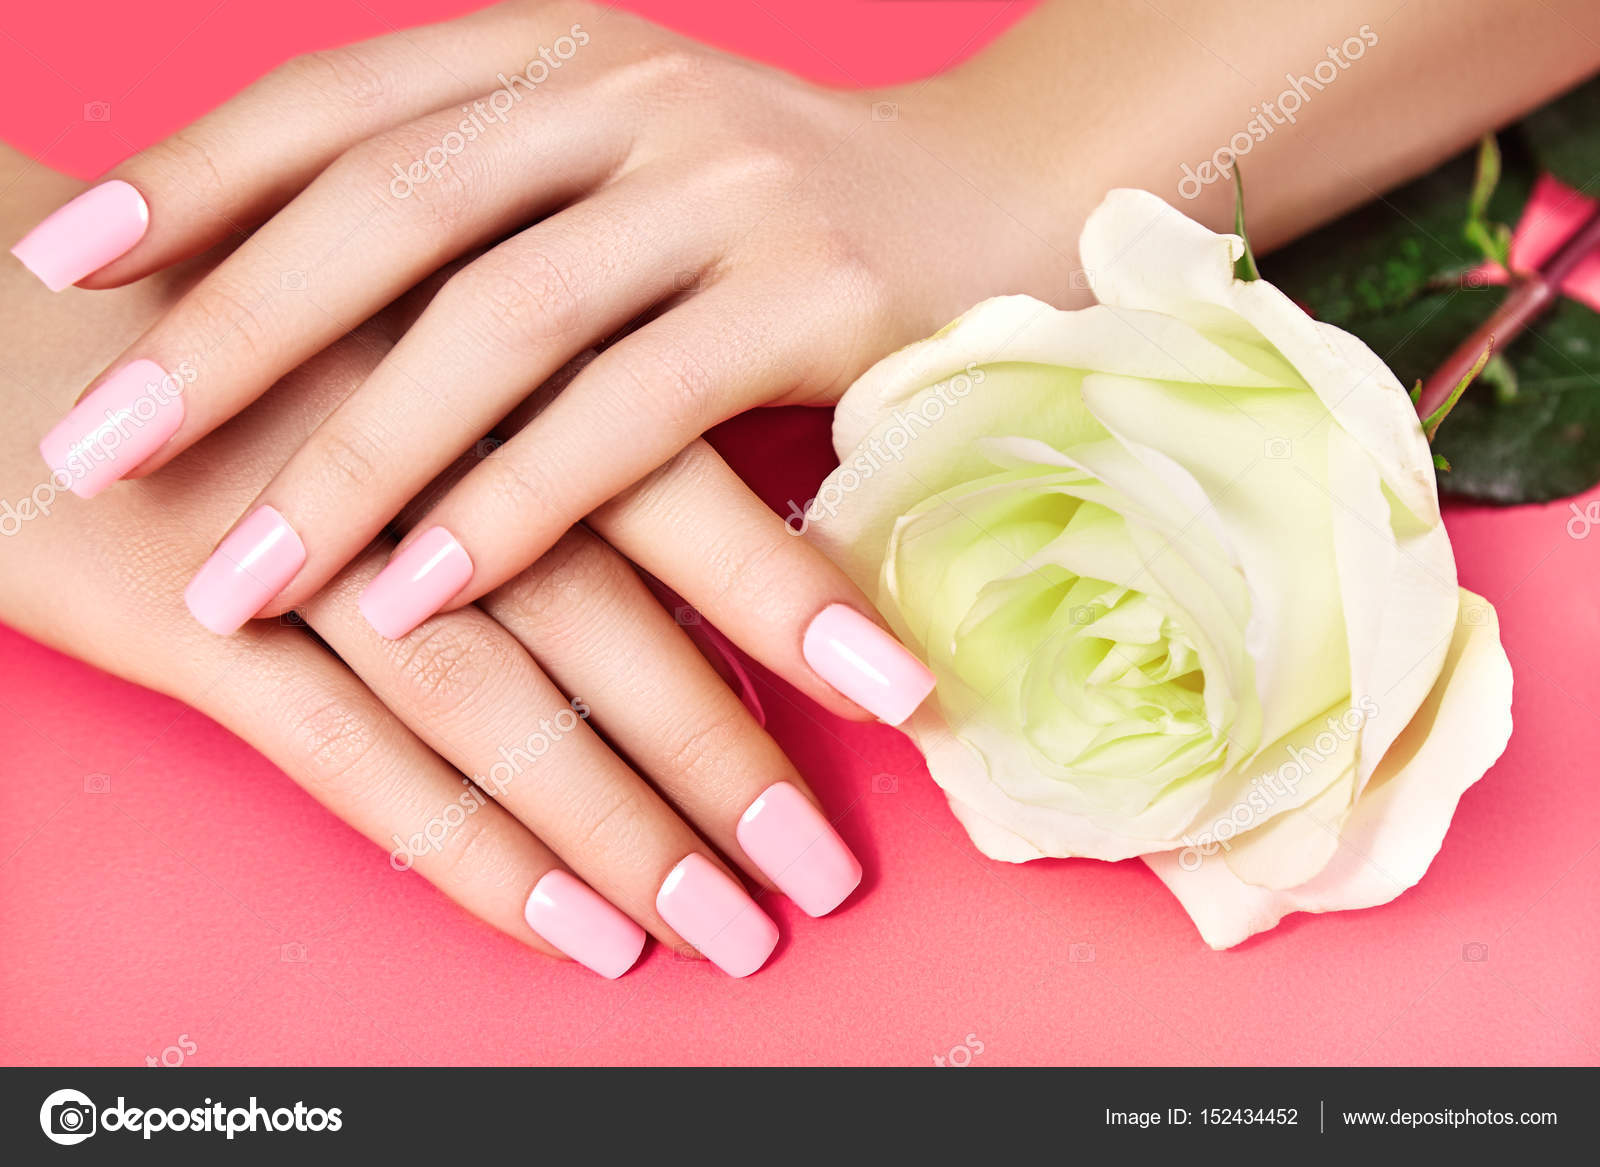 1. "Perfectly Manicured Nail Art: 20 Ideas for Your Next Salon Visit" - wide 5